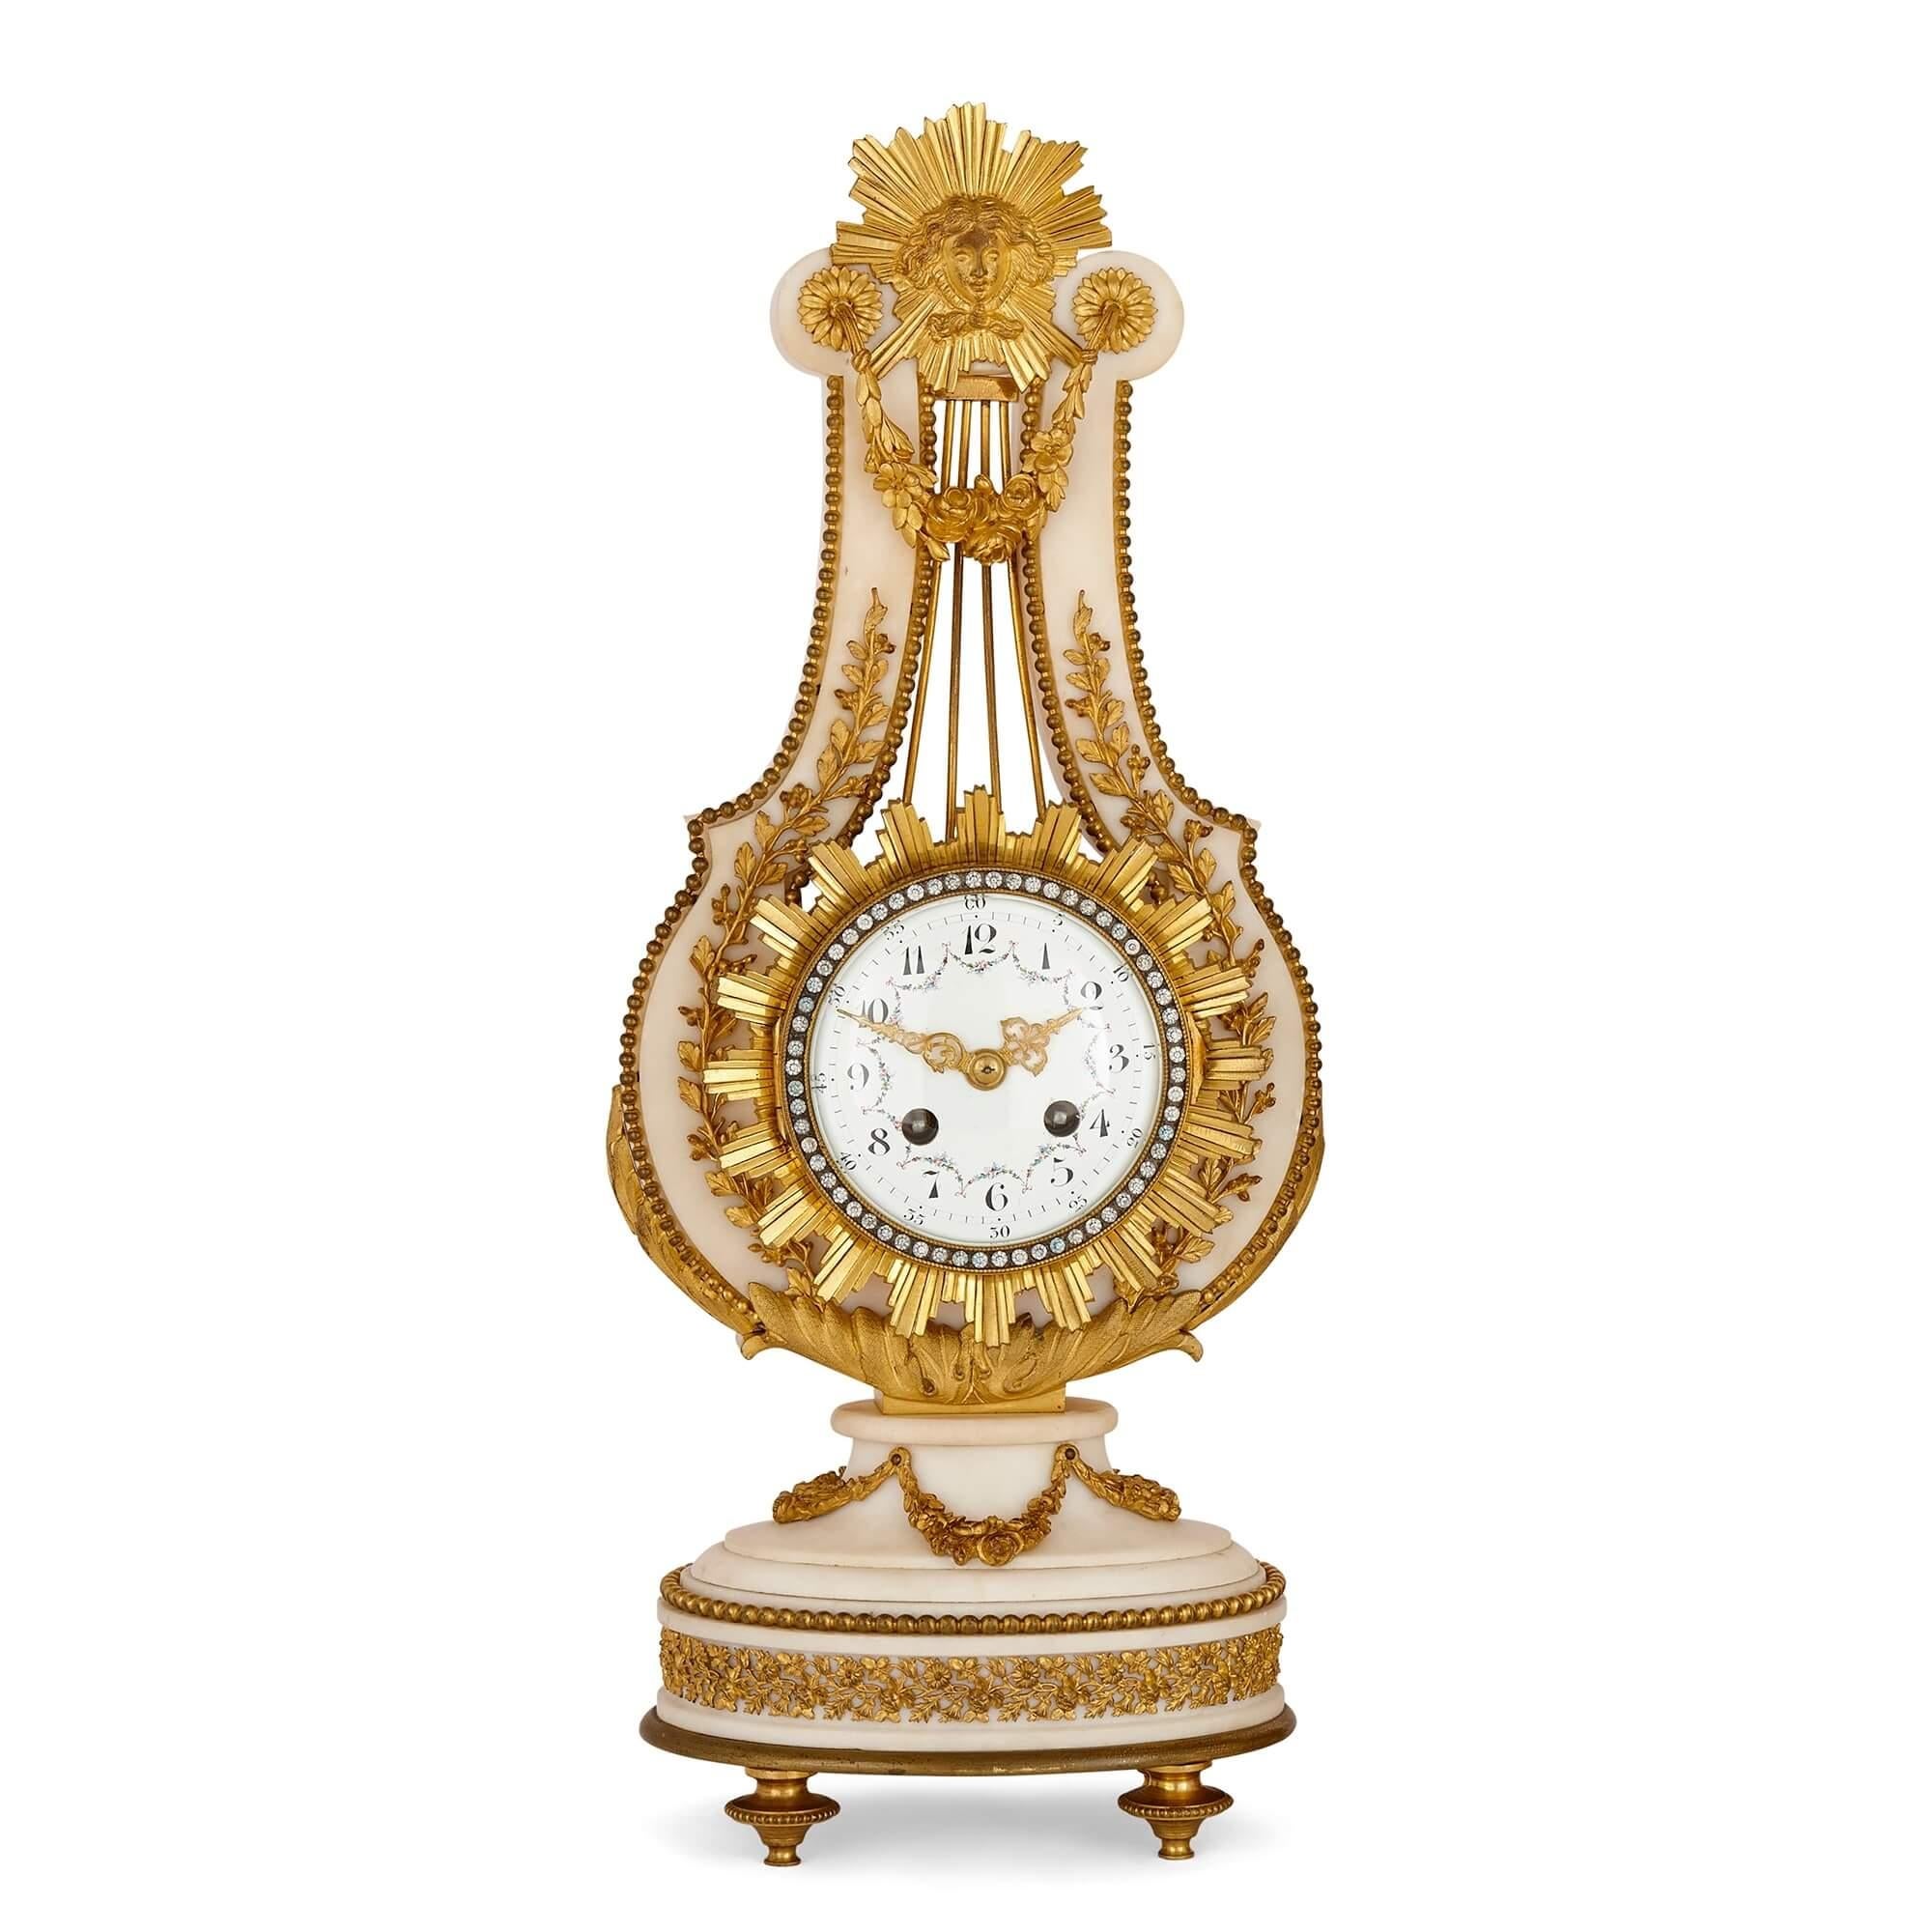 Antique marble and gilt bronze clock and barometer set 
English, 19th Century
Height 49cm, width 20cm, depth 12cm

This exquisite set of gilt bronze and marble clock and barometer from the esteemed Barwise & Sons, London, is a pairing seldom